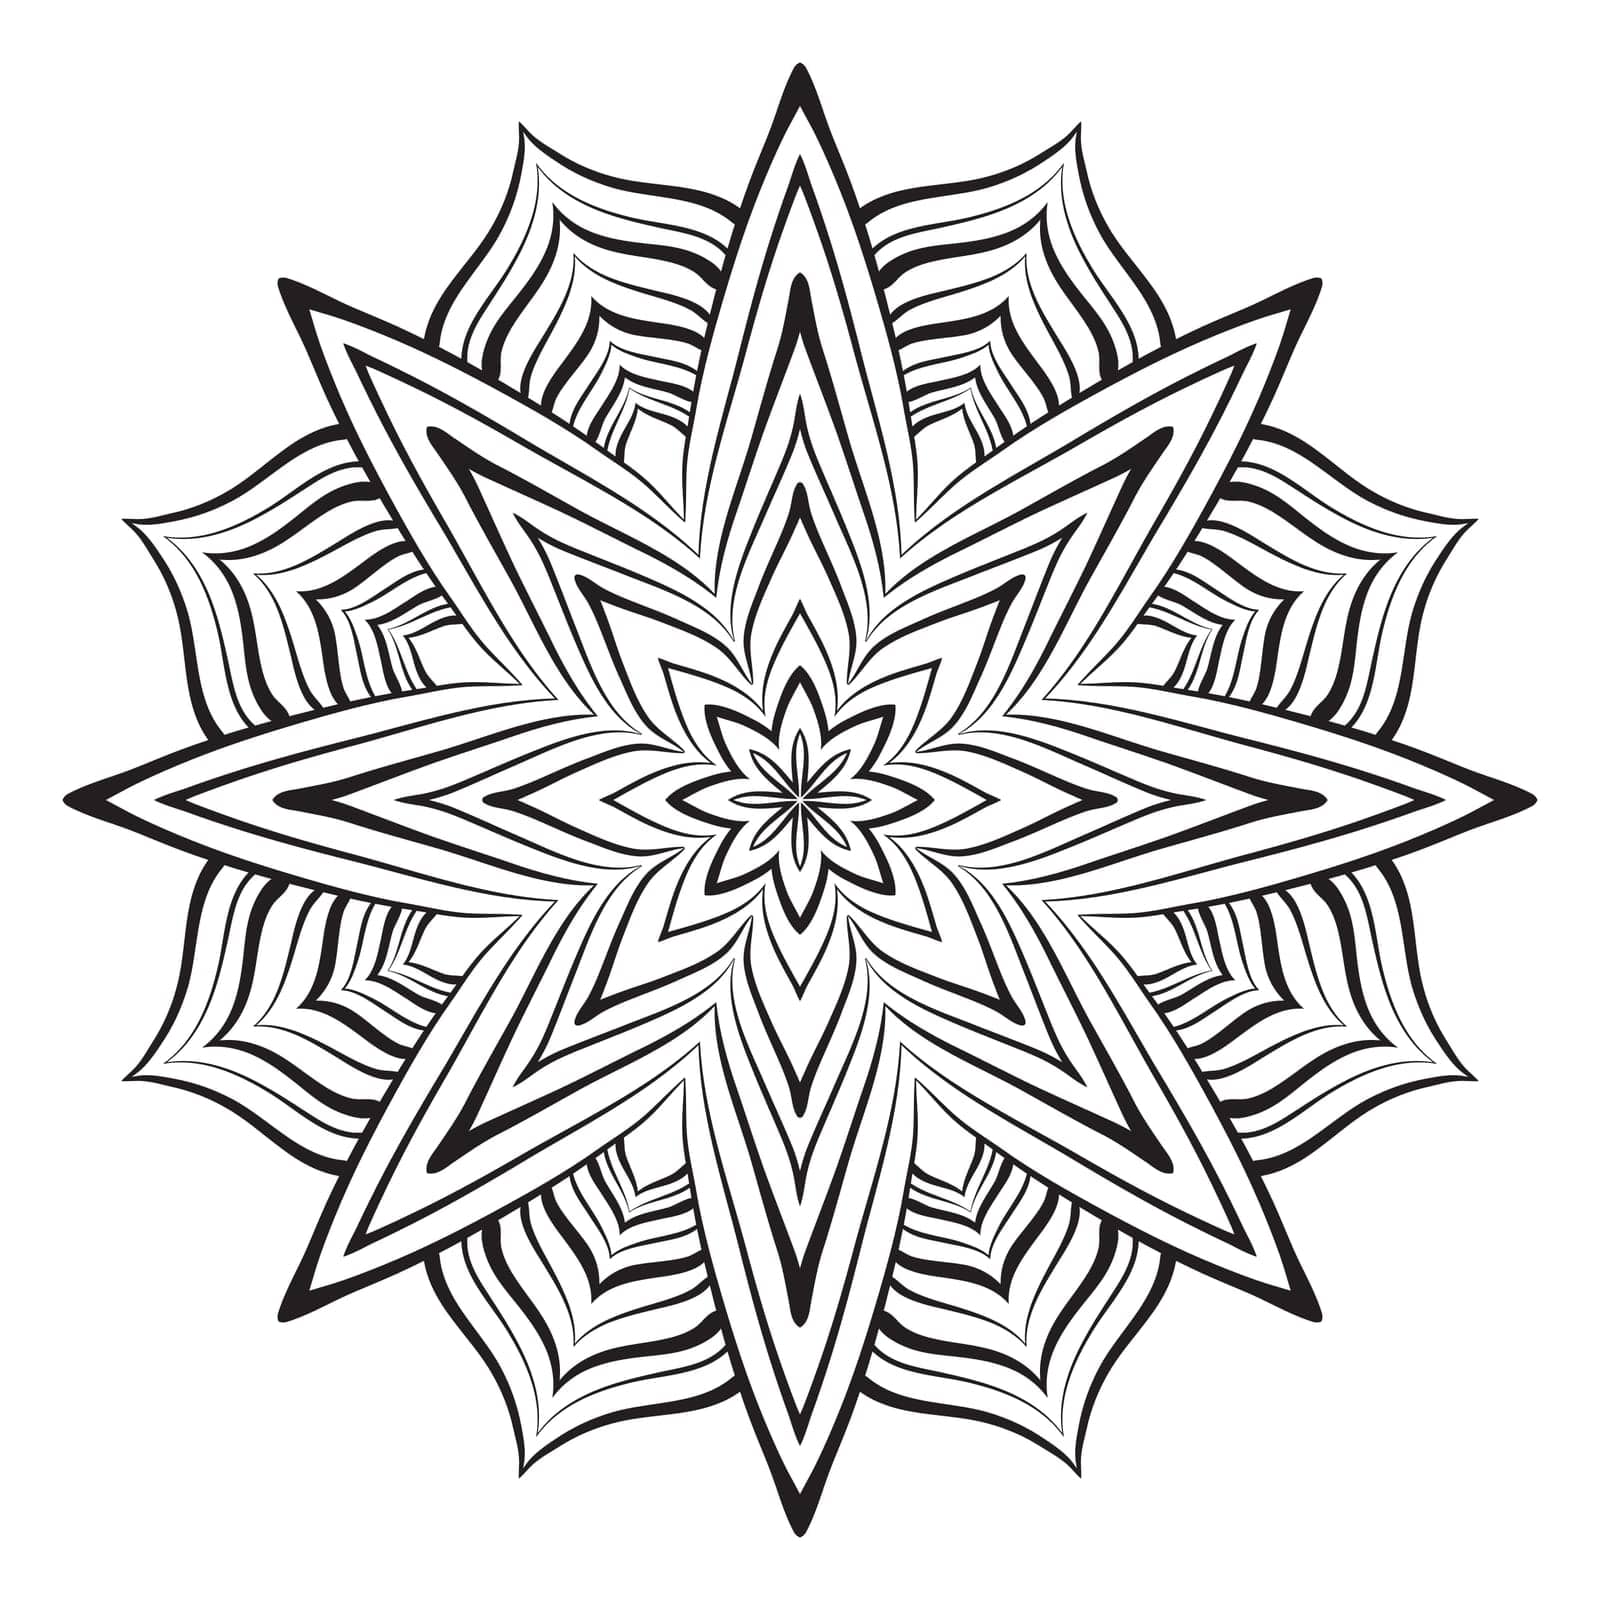 Flower mandala coloring page. Simple symmetric floral shape for mindful coloring by amovitania